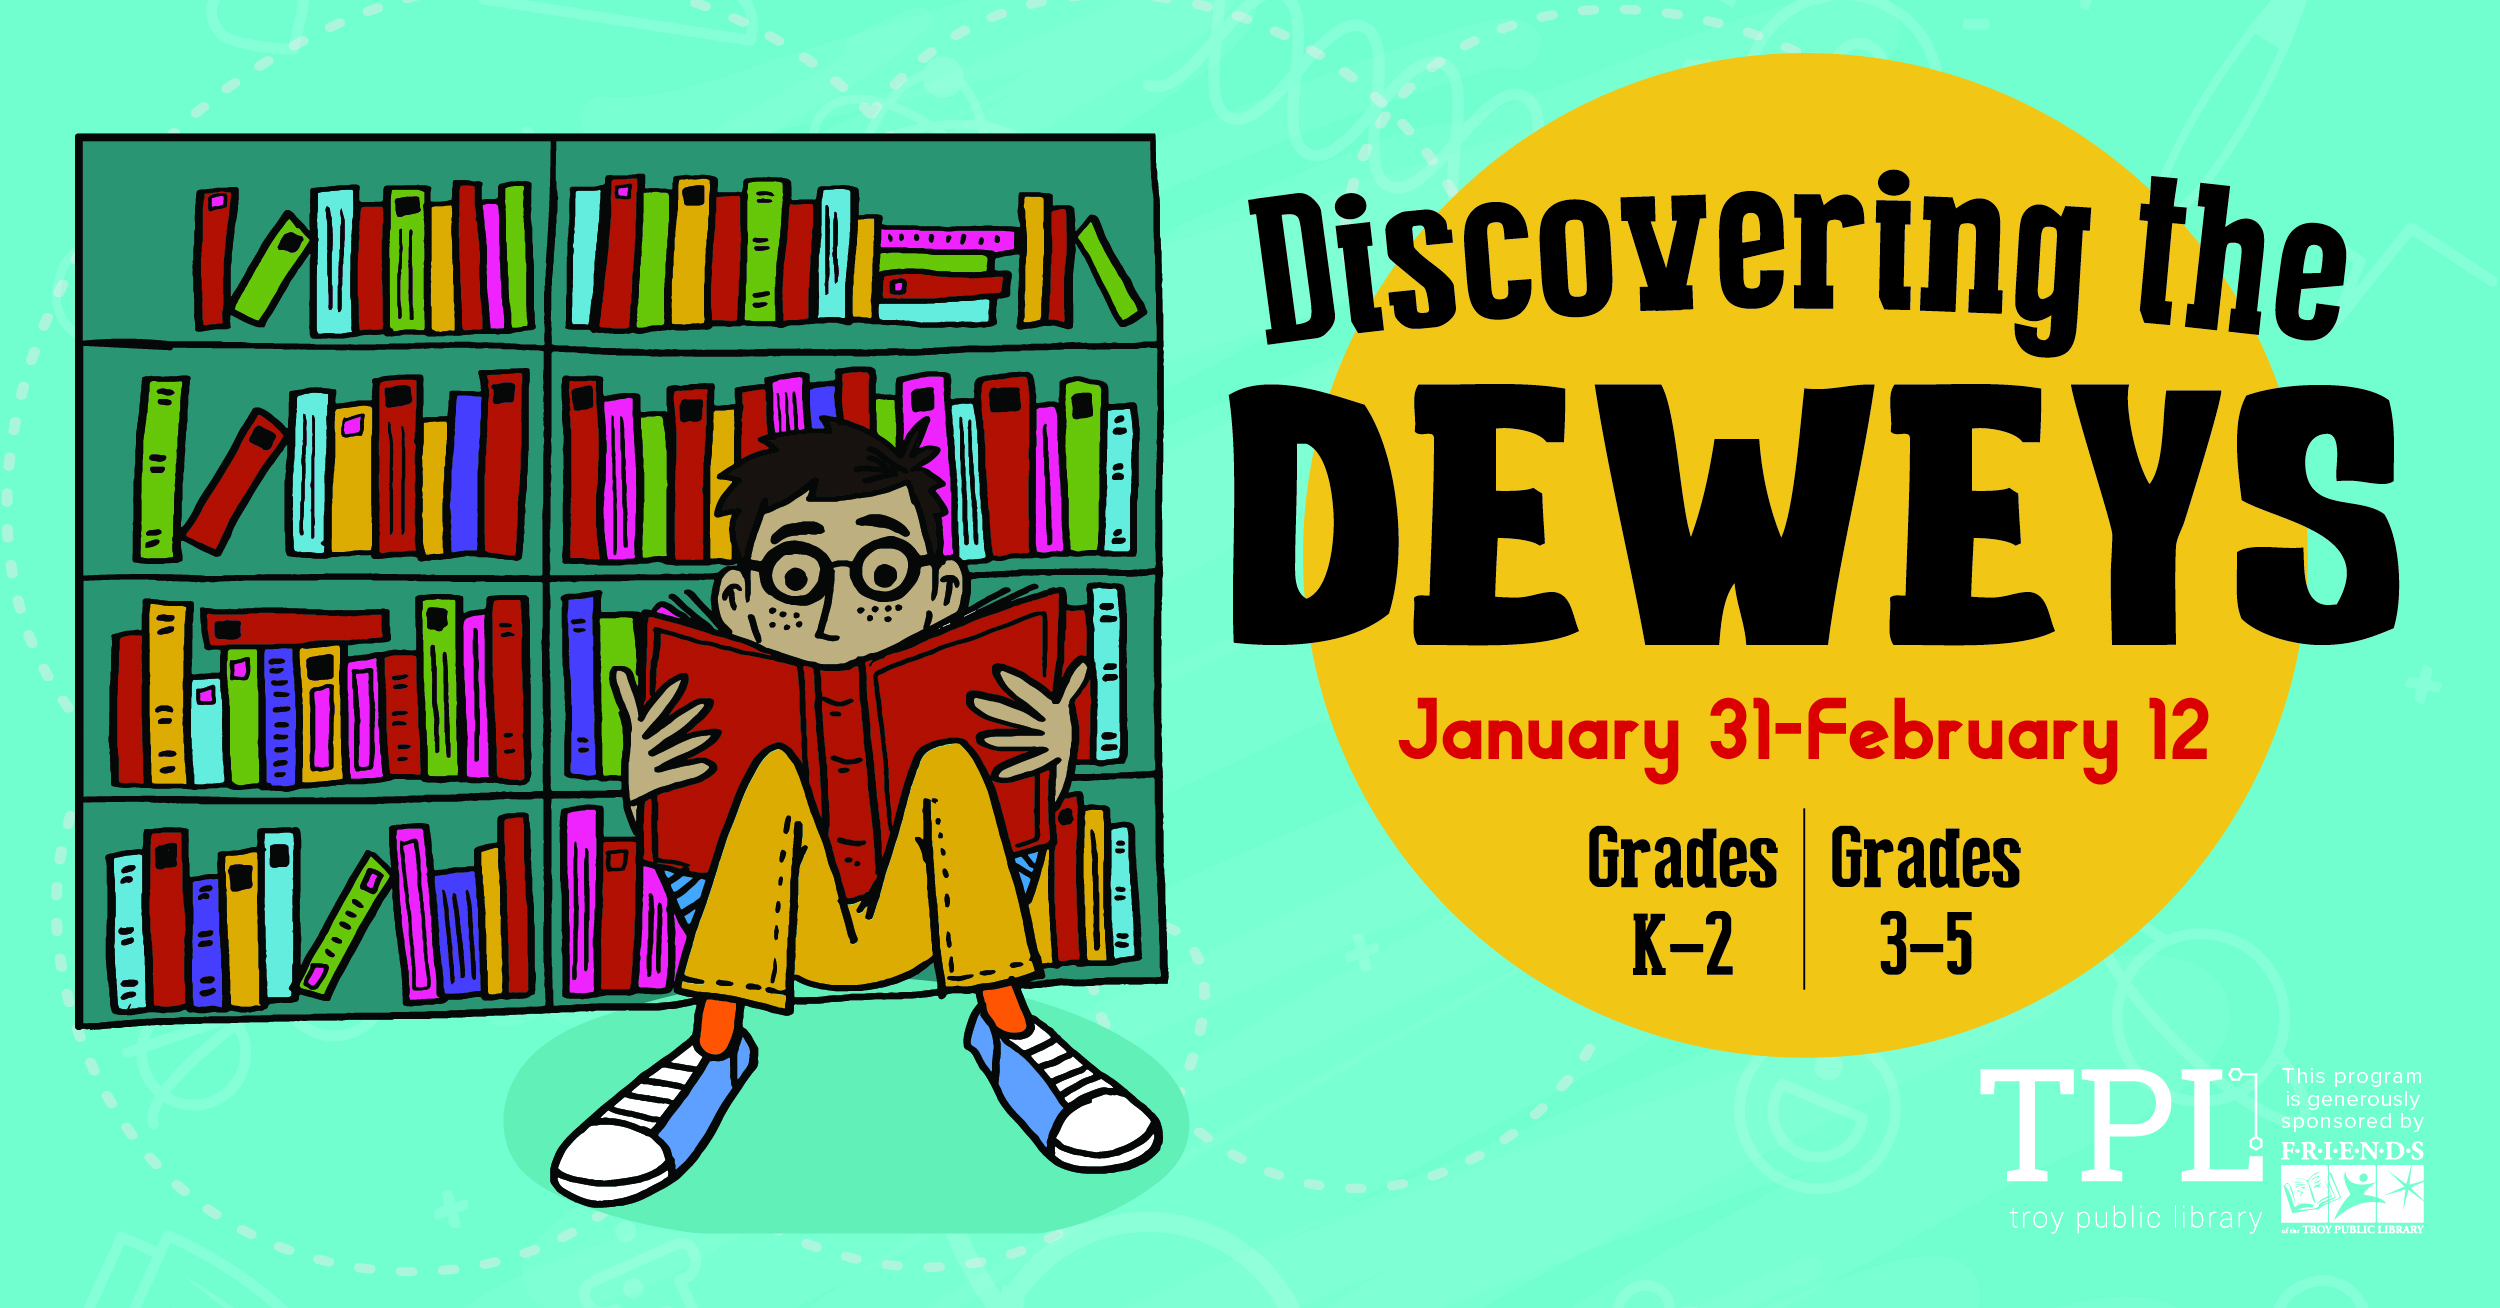 cartoon reading in front of a cartoon bookshelf over a light blue background. "discovering the deweys january 31-february 12 grades k-2 grades 3-5" on a yellow circle background